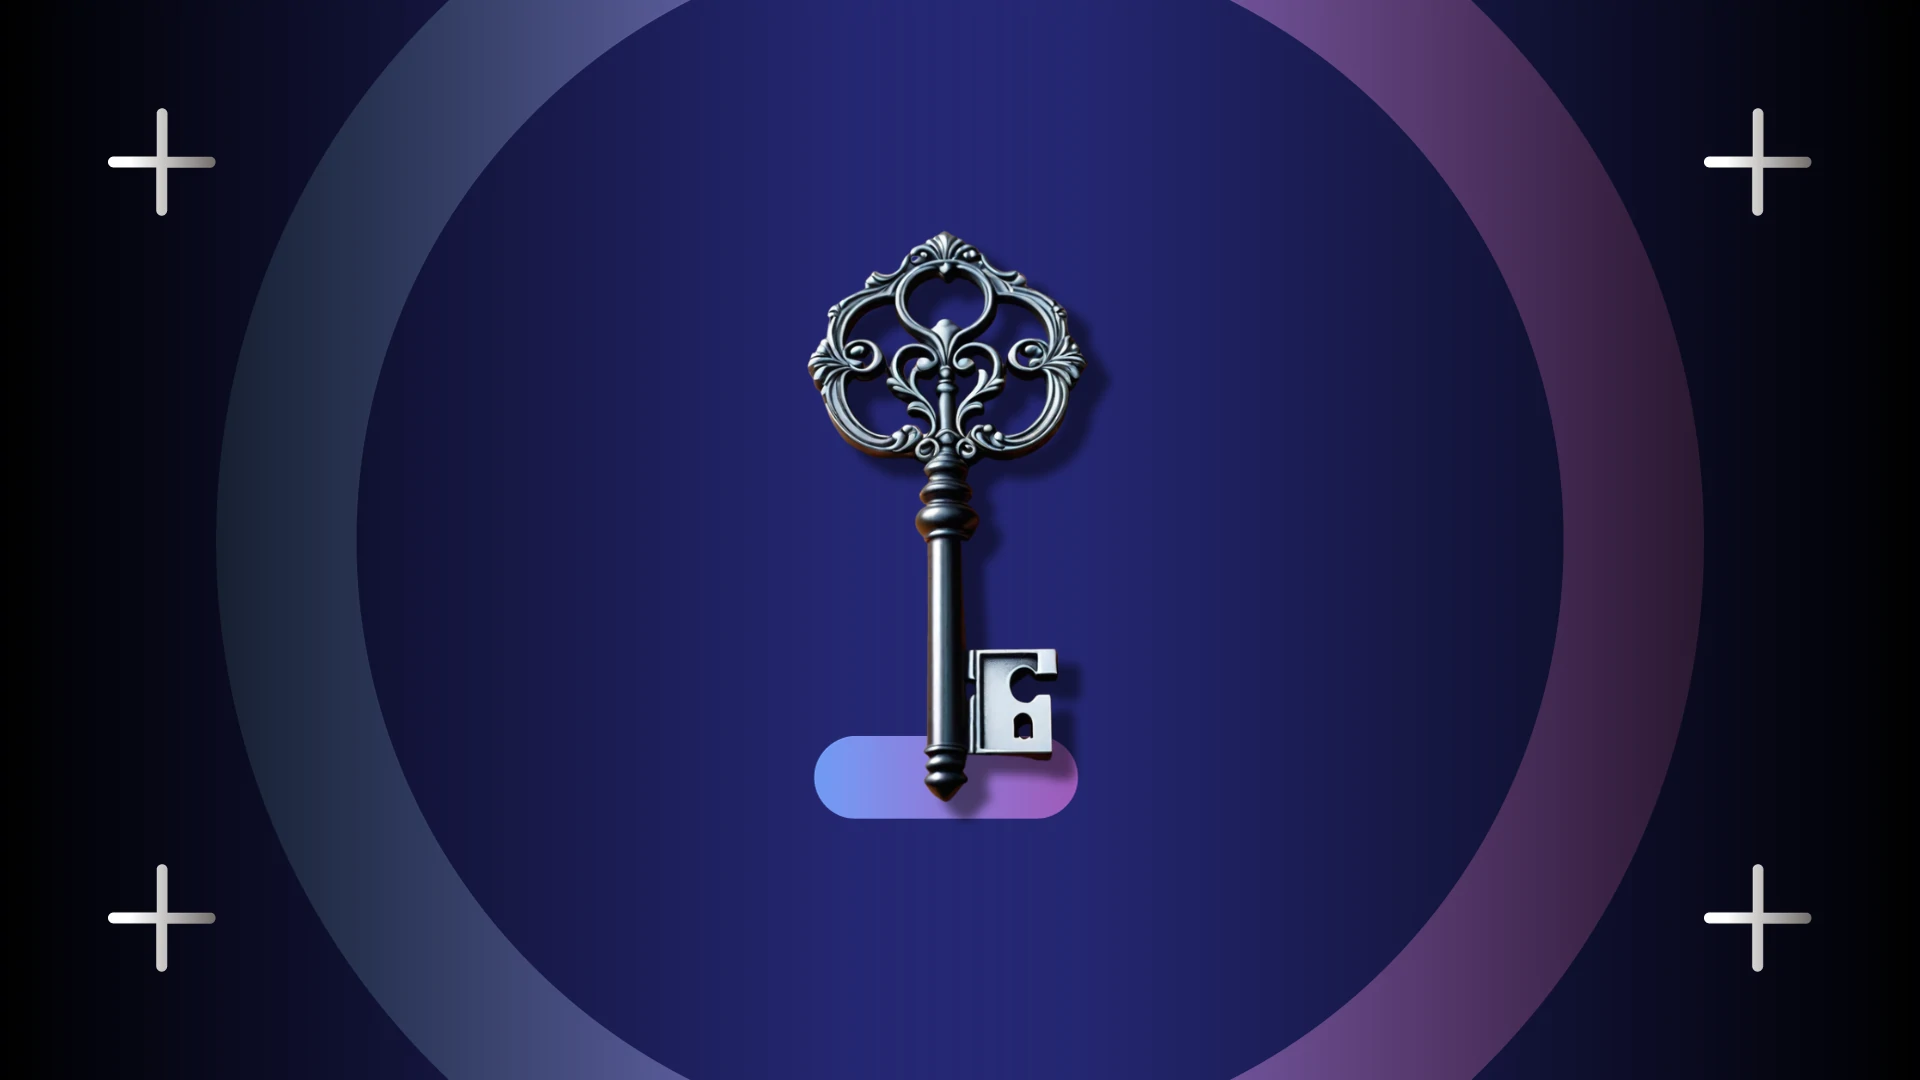 a silver key in the centre surround by a circle